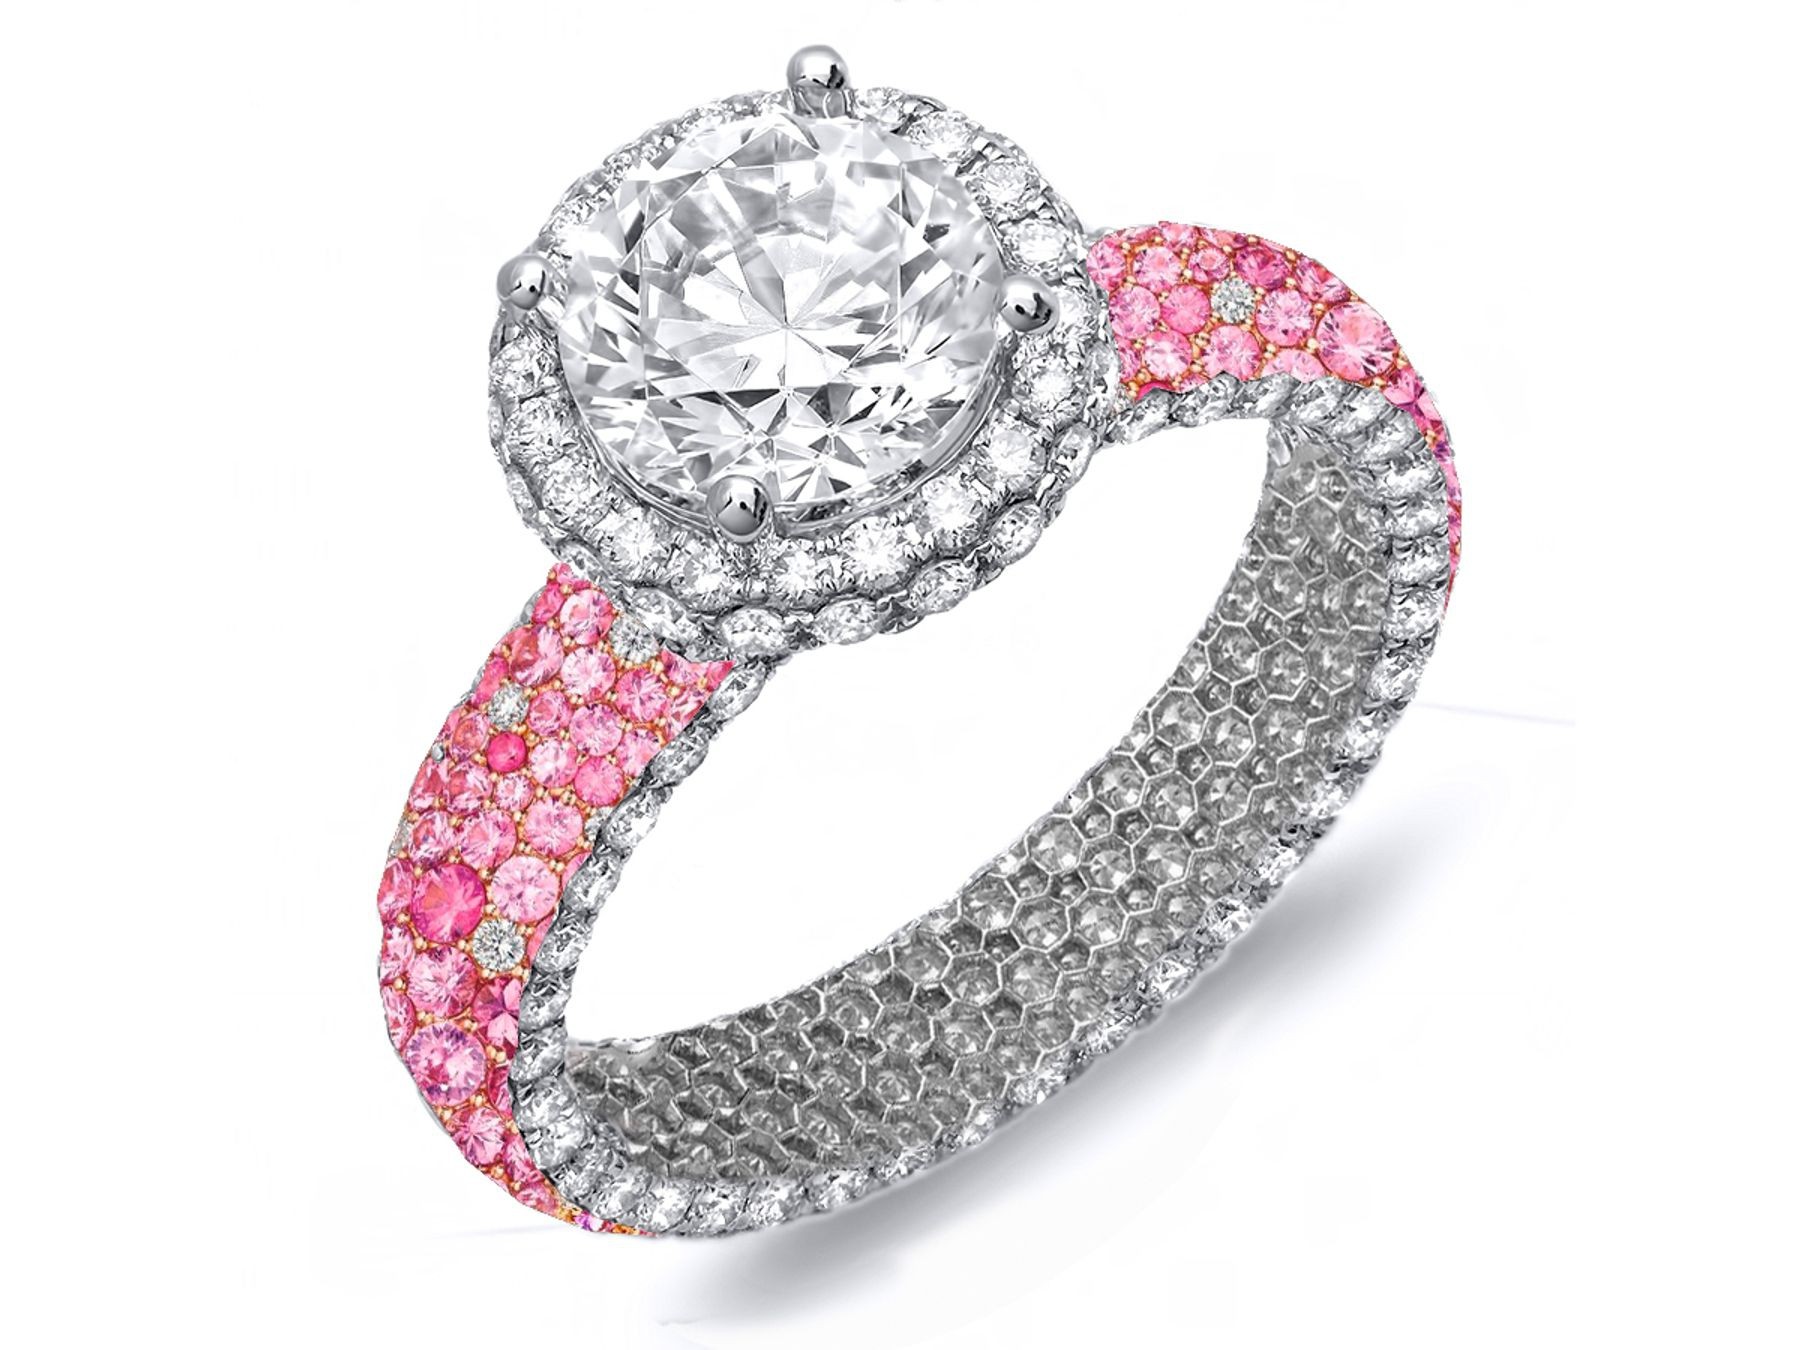 Made To Order Rings Featuring Delicate French Halo Pave Diamonds & Vivid Pink Sapphires